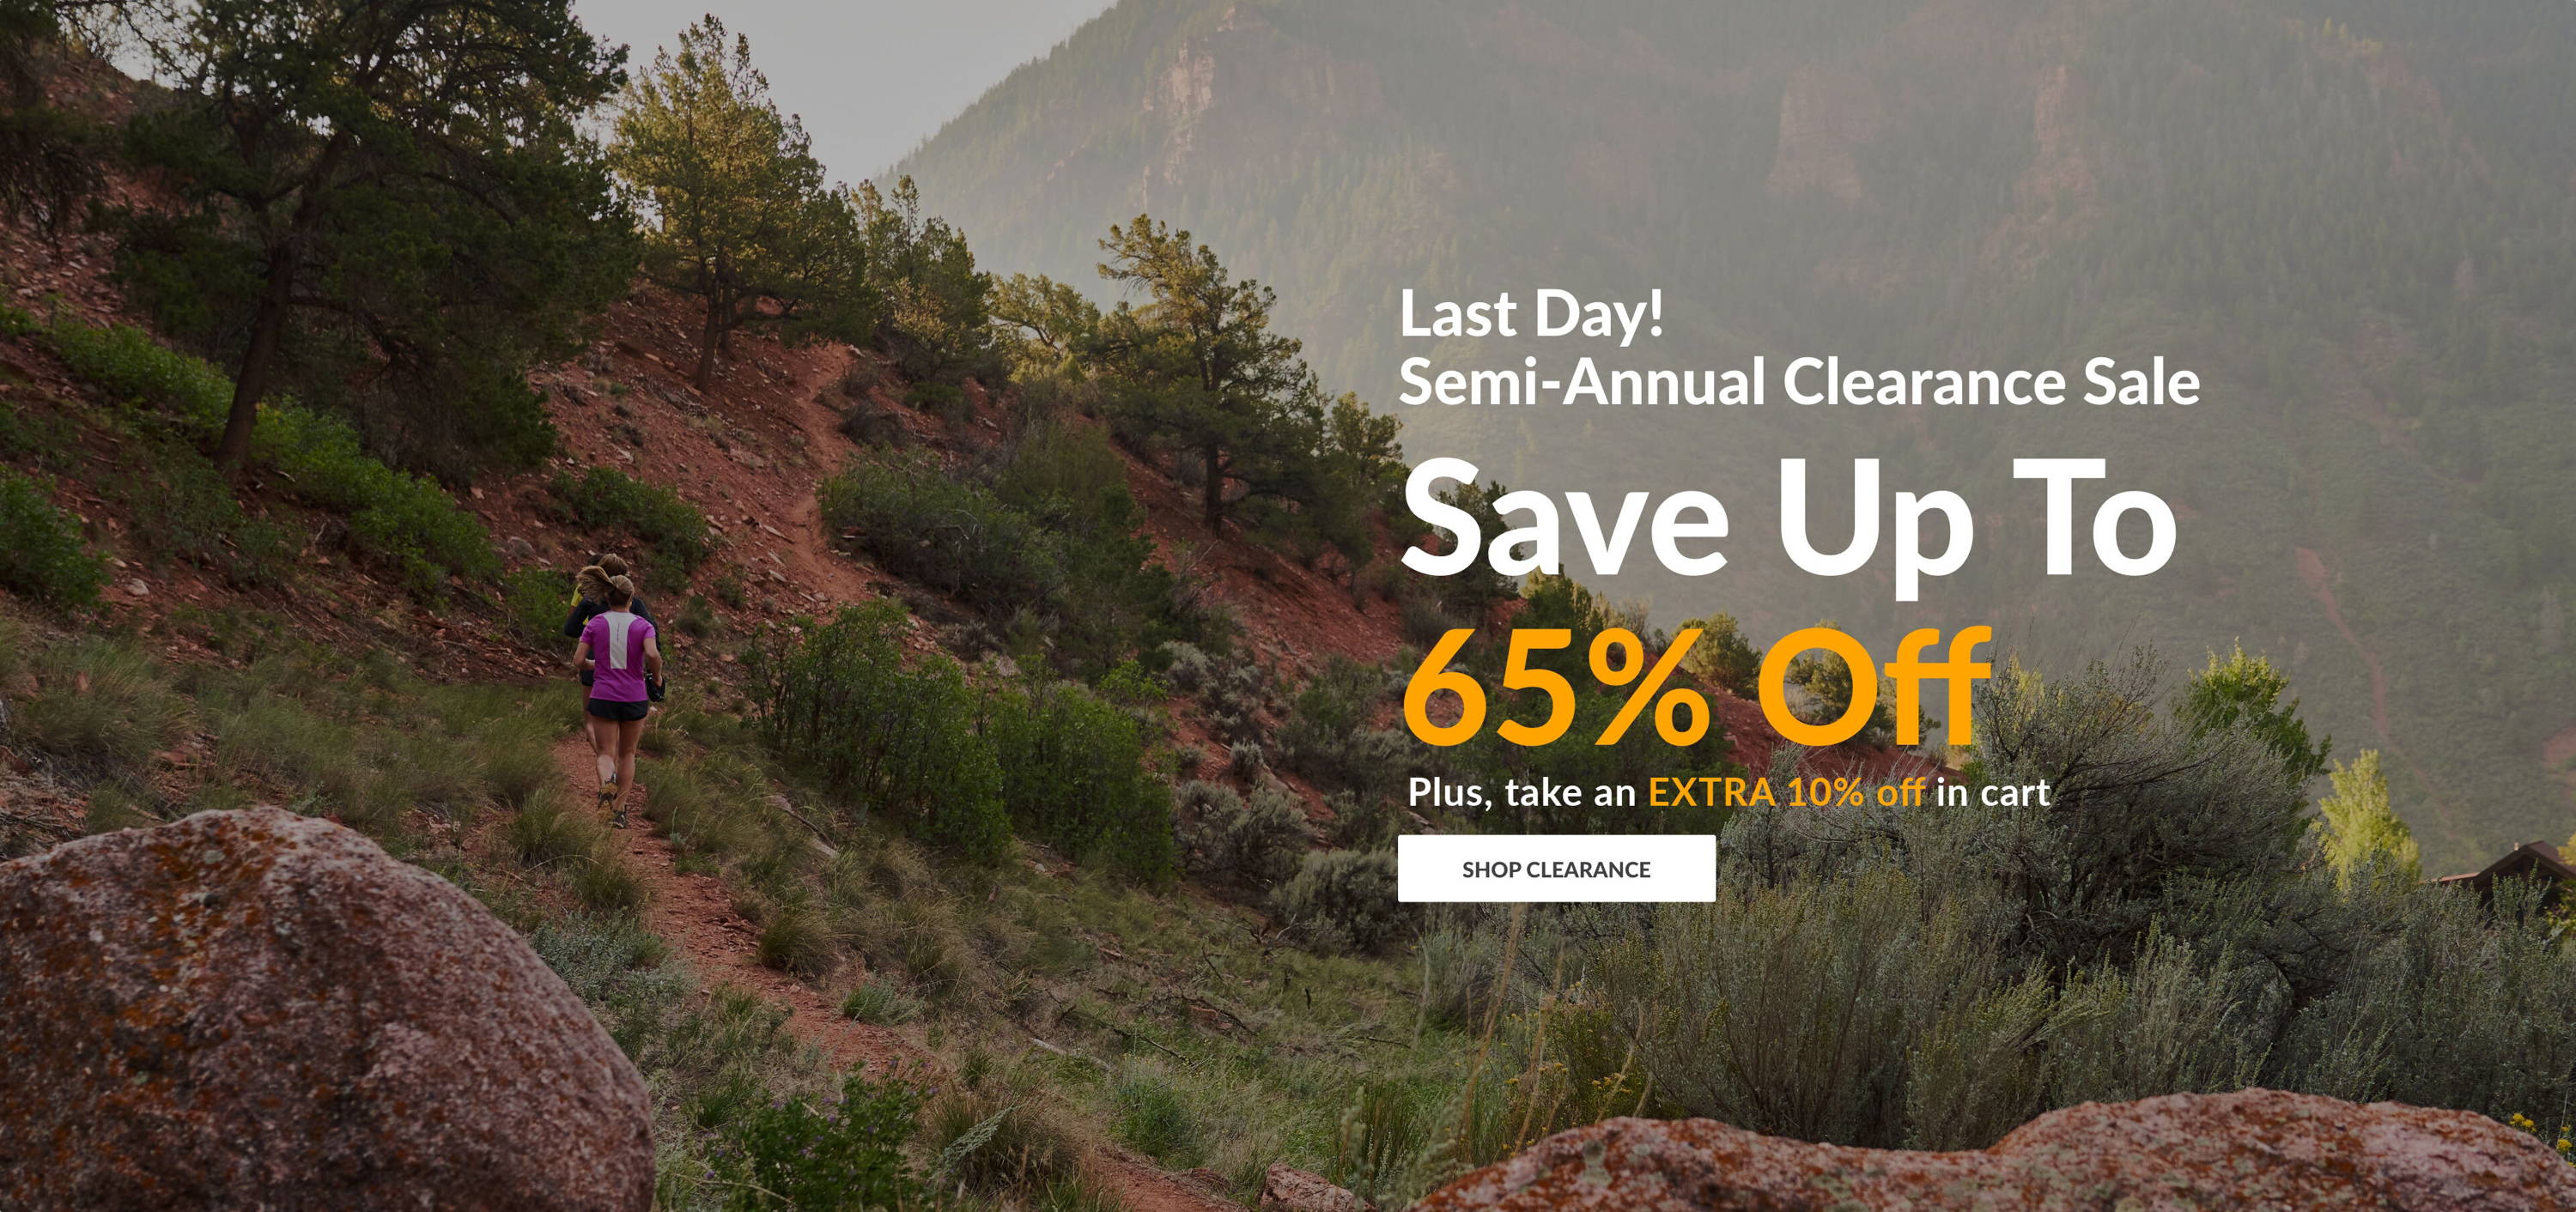 Last Day! Semi-Annual Clearance Sale. Save up to 65% Off. Plus, take an EXTRA 10% off in cart. Shop Clearance